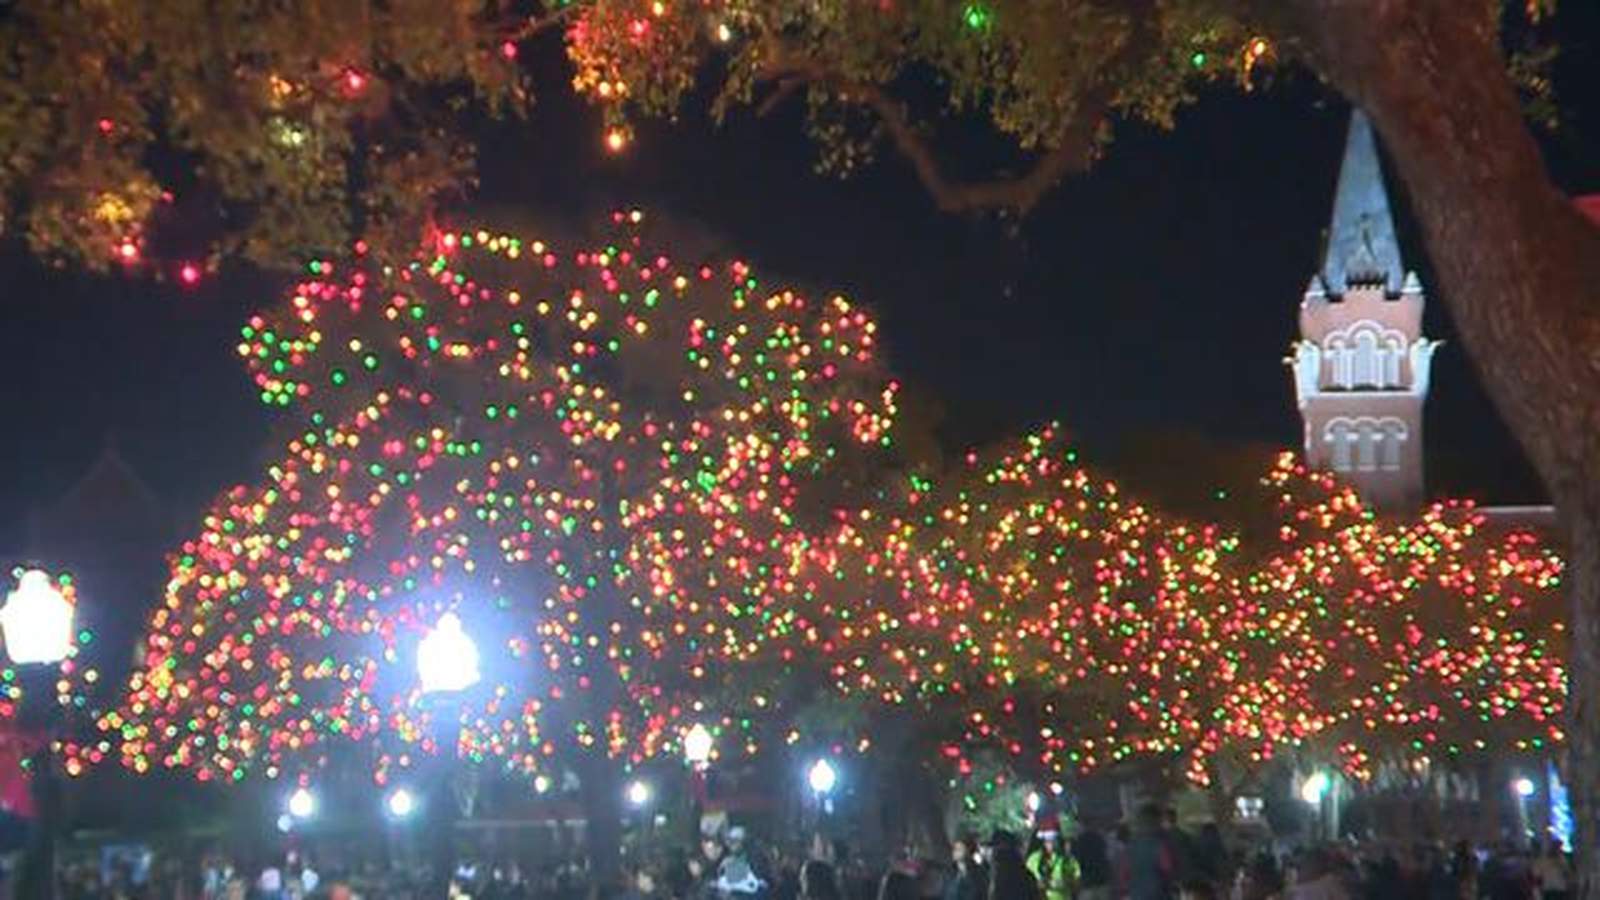 WATCH: UIW kicks off Light the Way holiday event